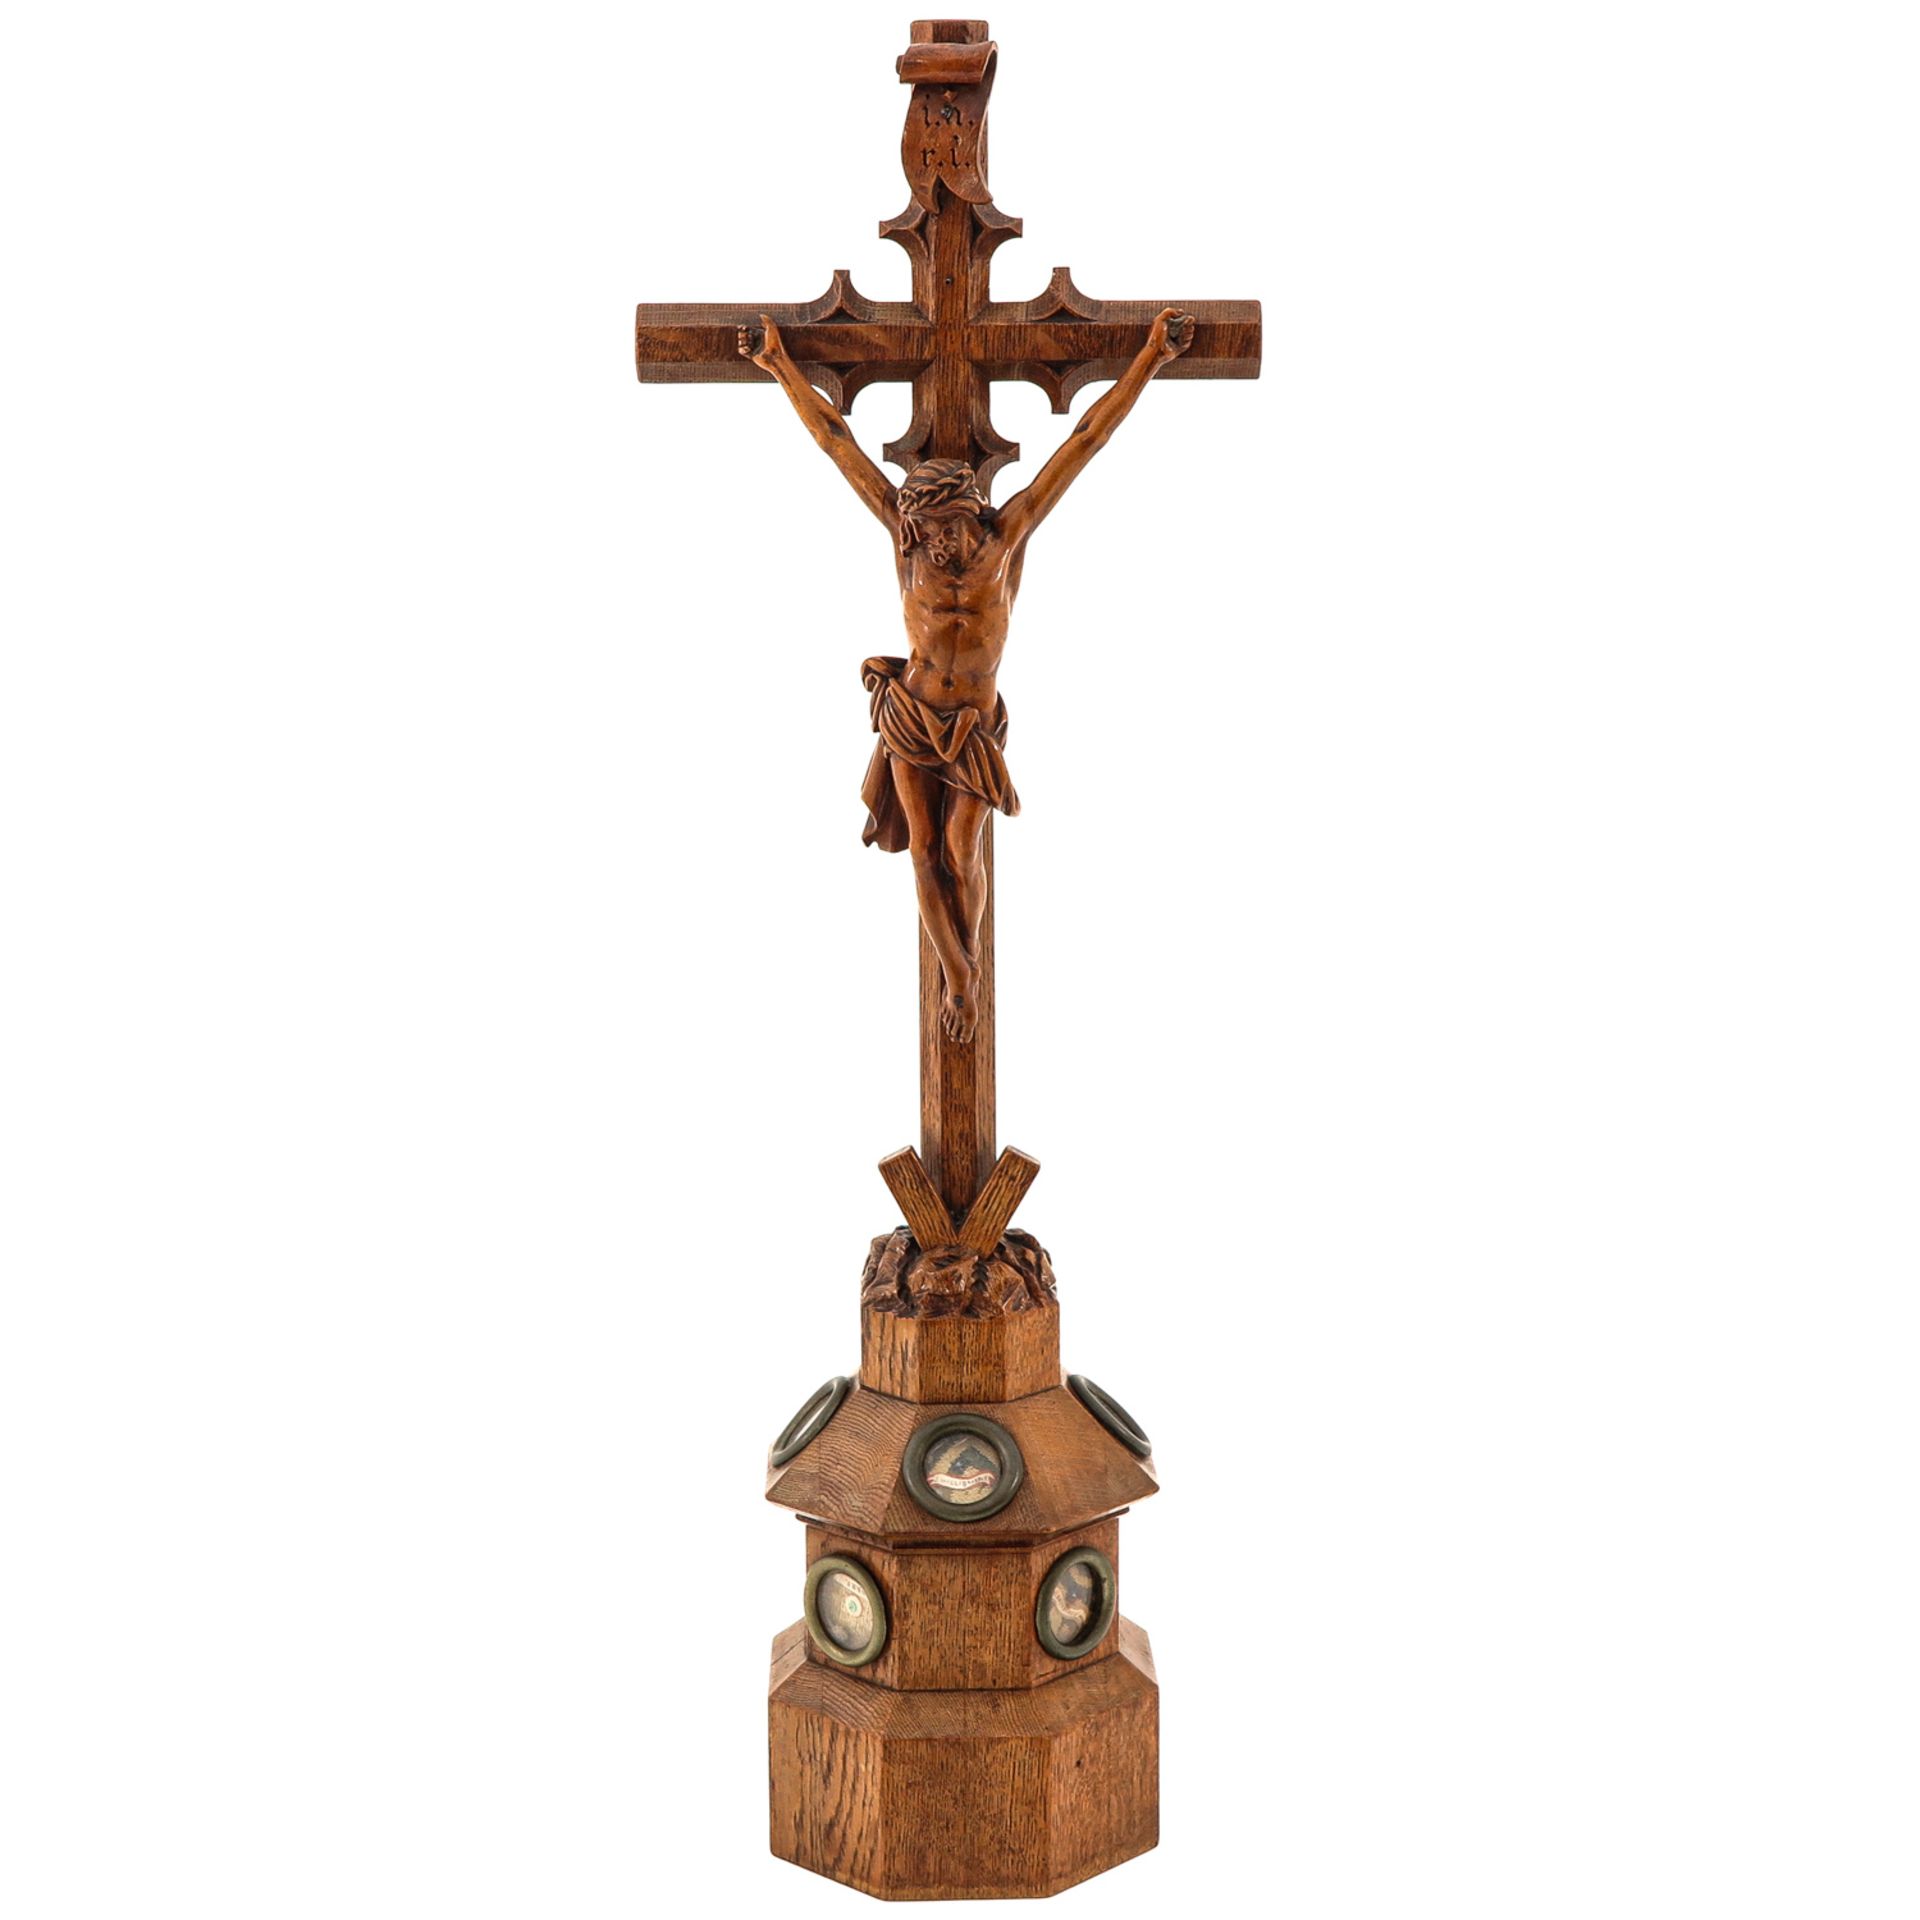 A 19th Century Crucifix holding 5 Relics